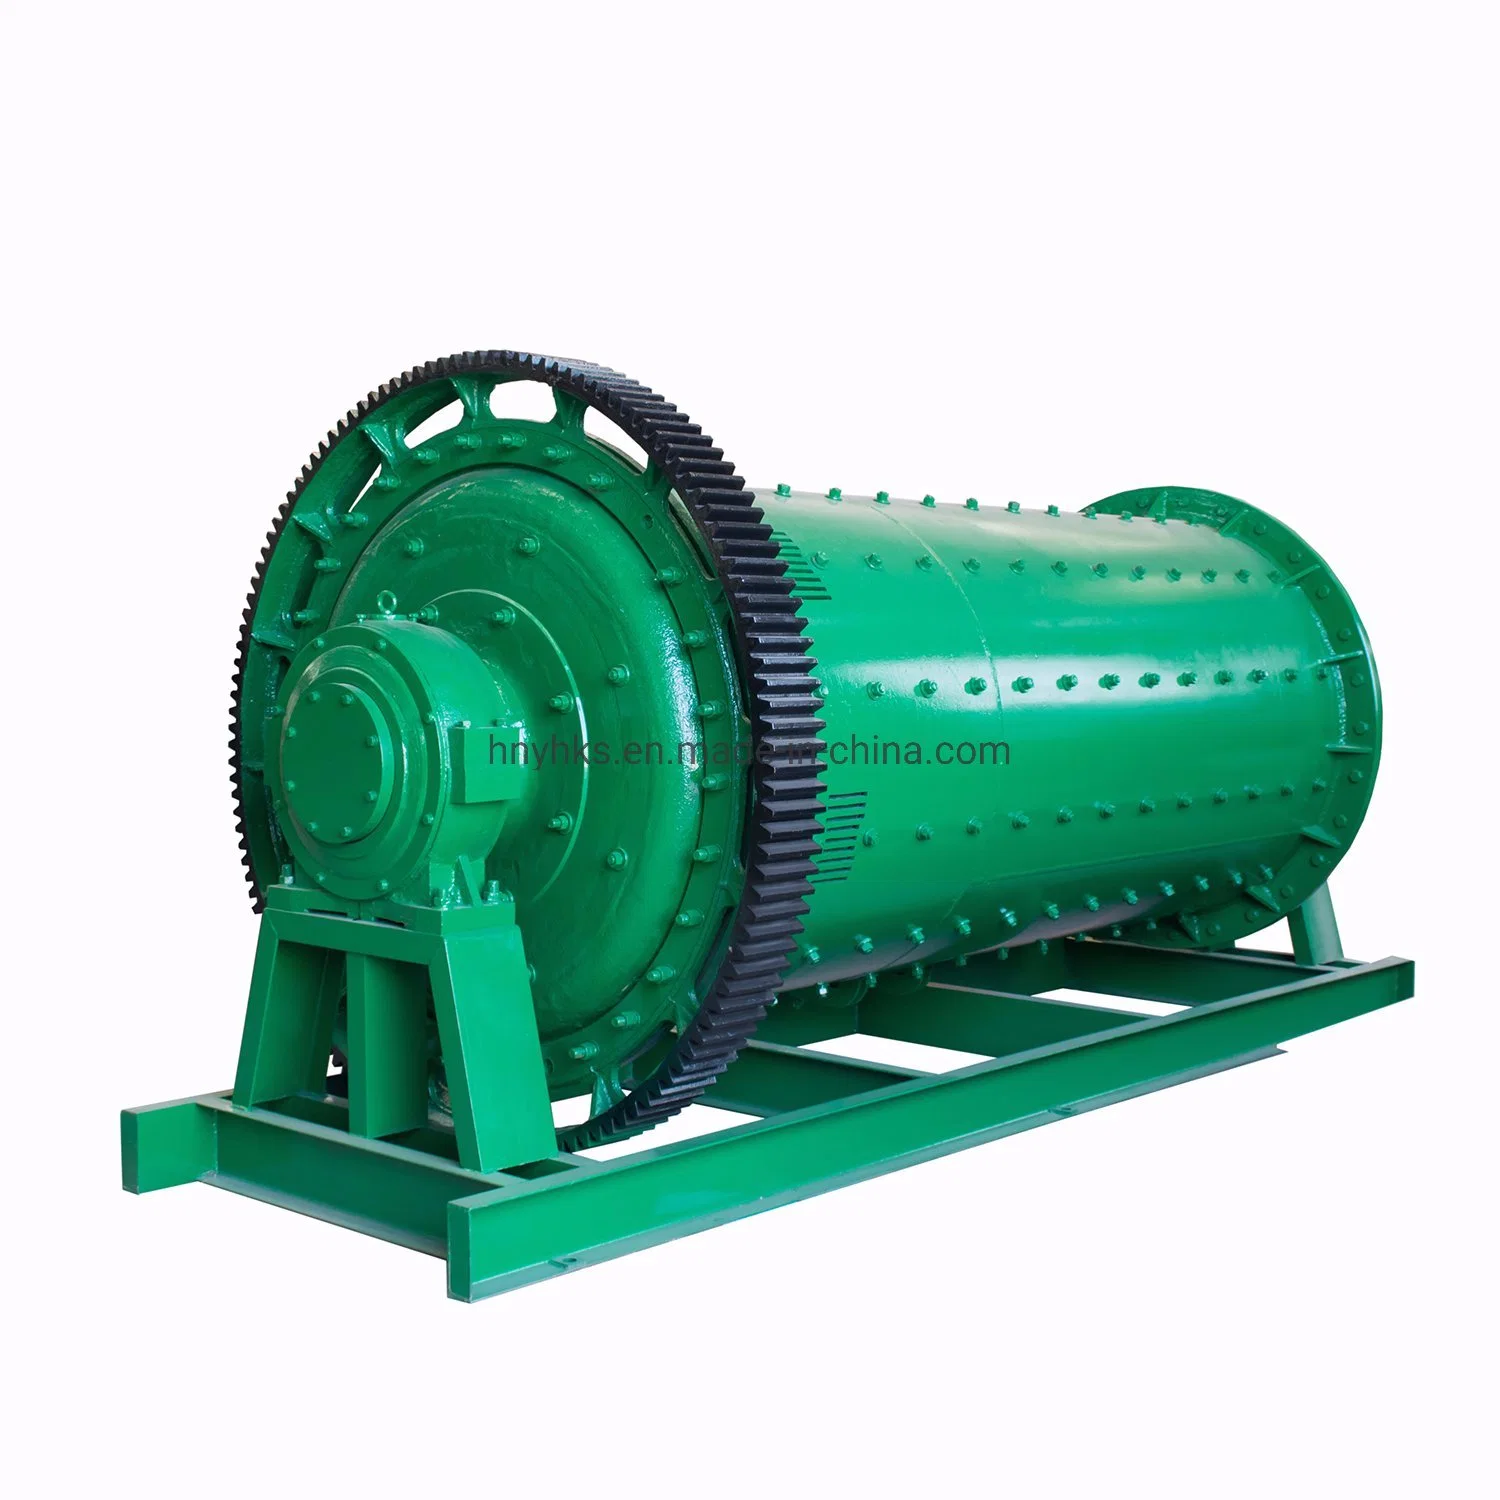 Mining Grinding Ball Mill Machine. Milling Machine for Copper Ore Grinding